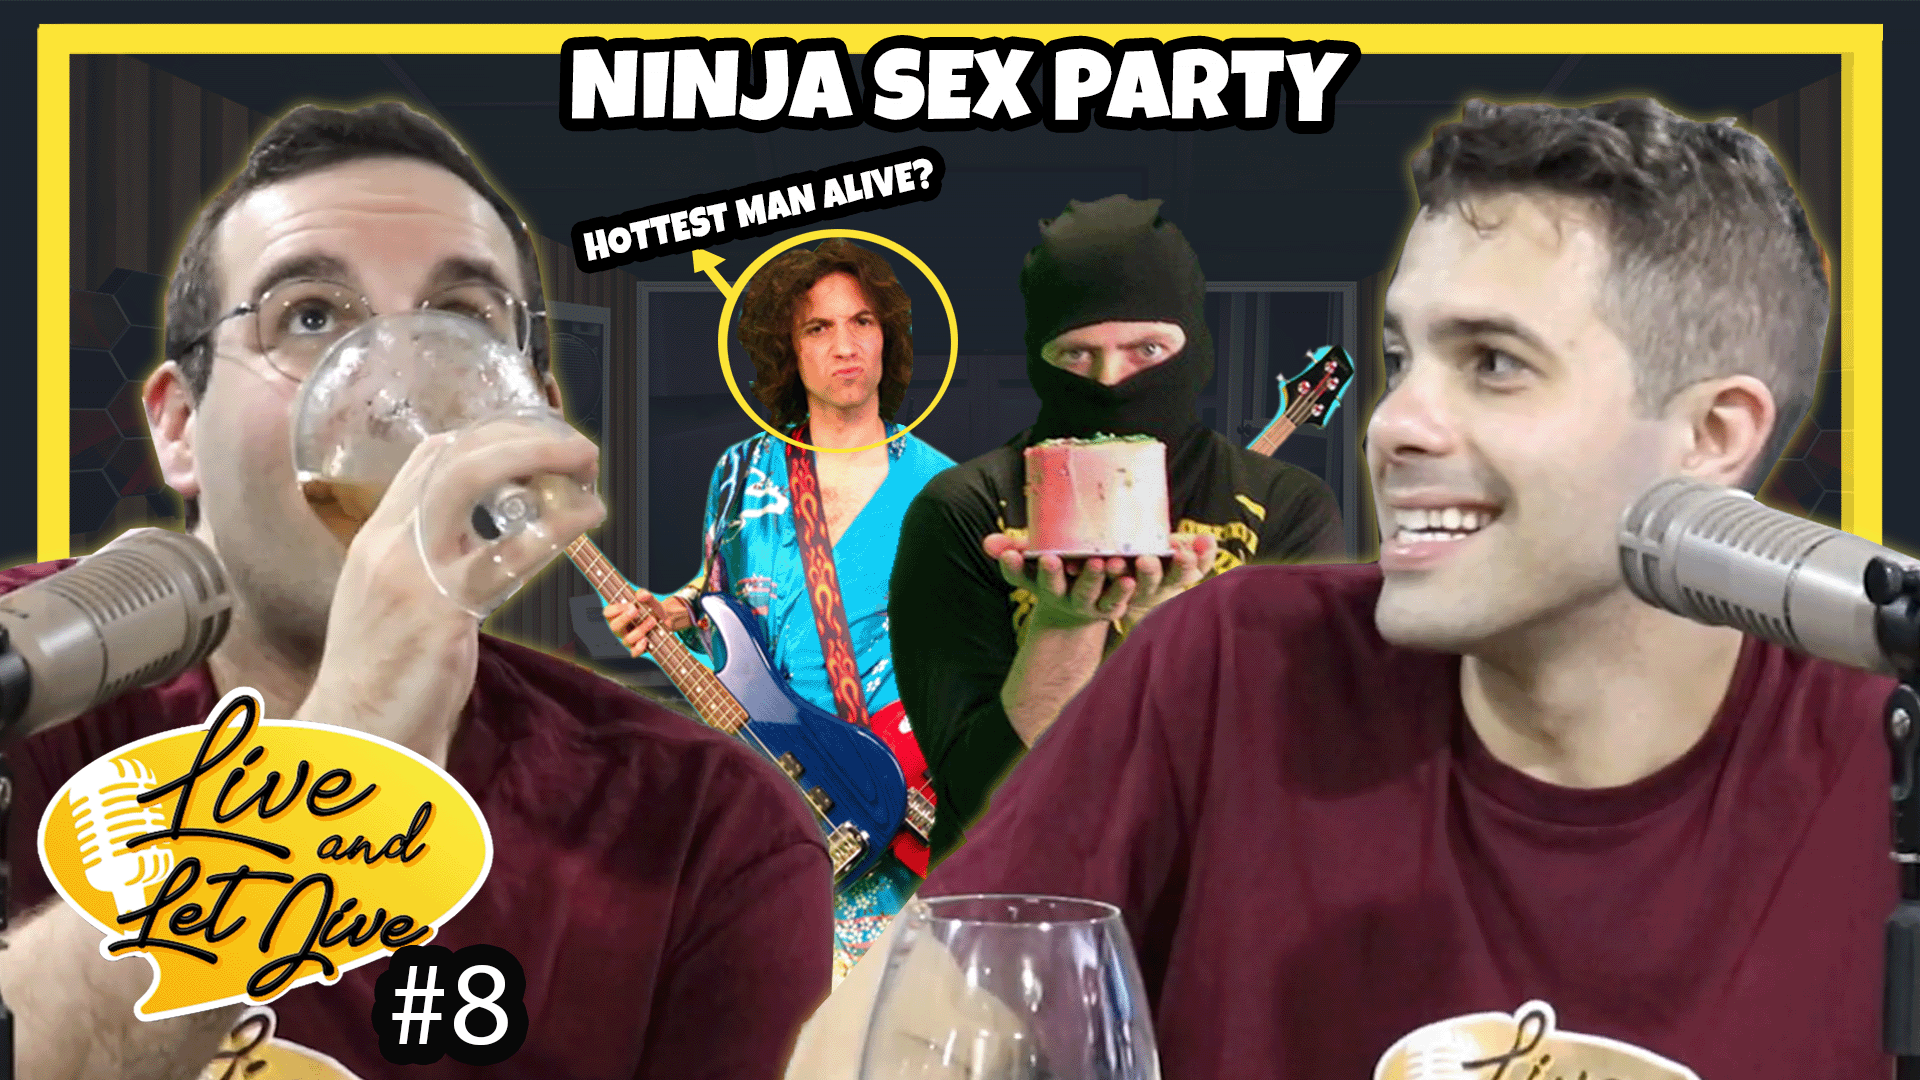 DANNY, DON'T YOU KNOW ABOUT NSP?!?! 